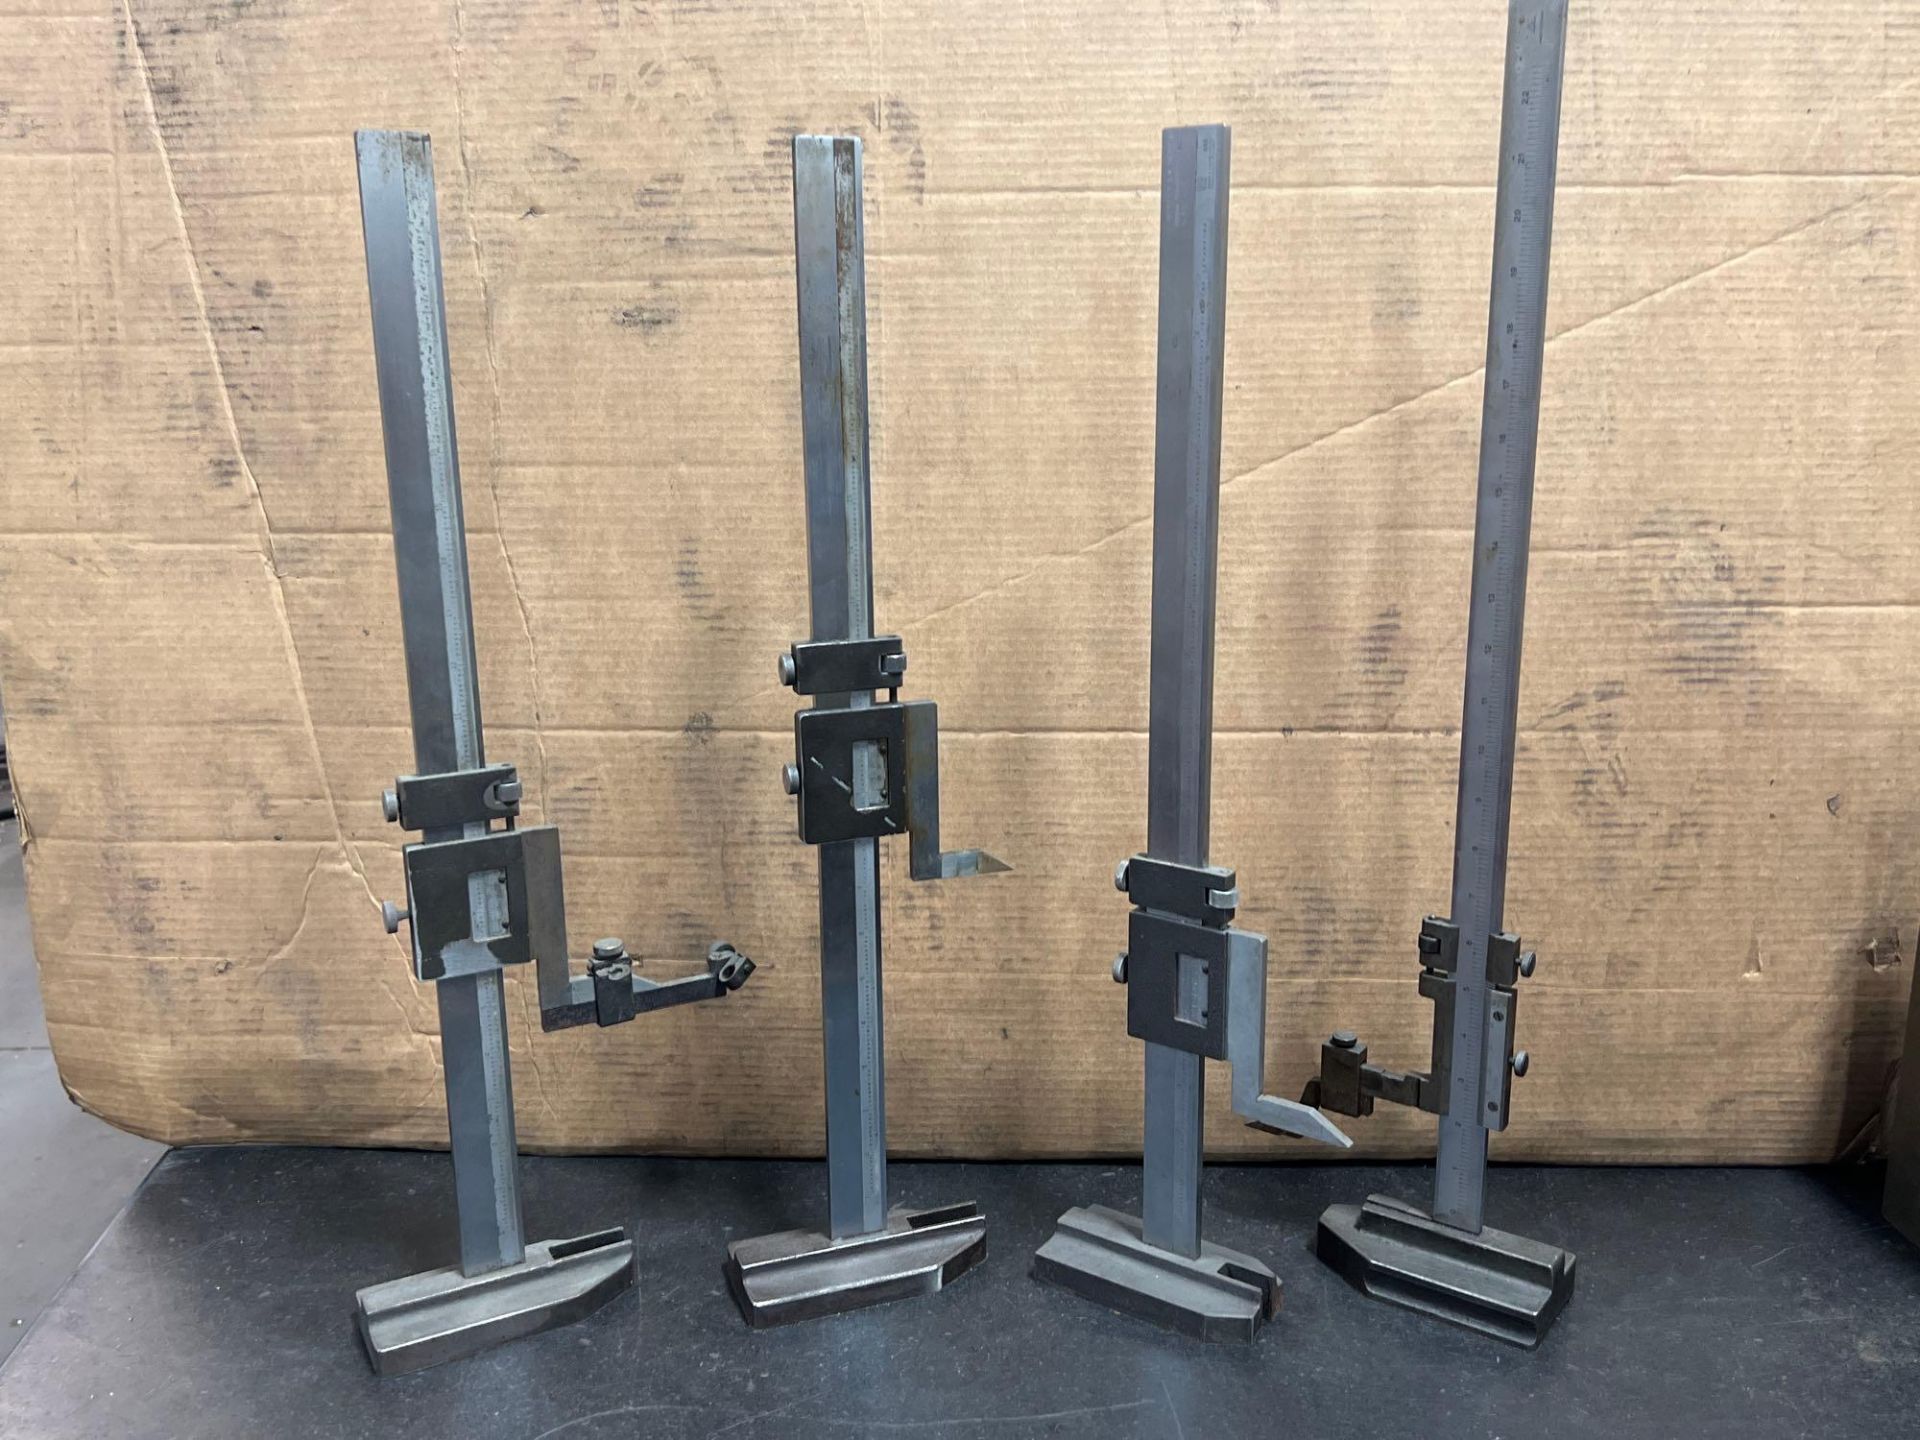 Lot of (4) Vernier Height Gages